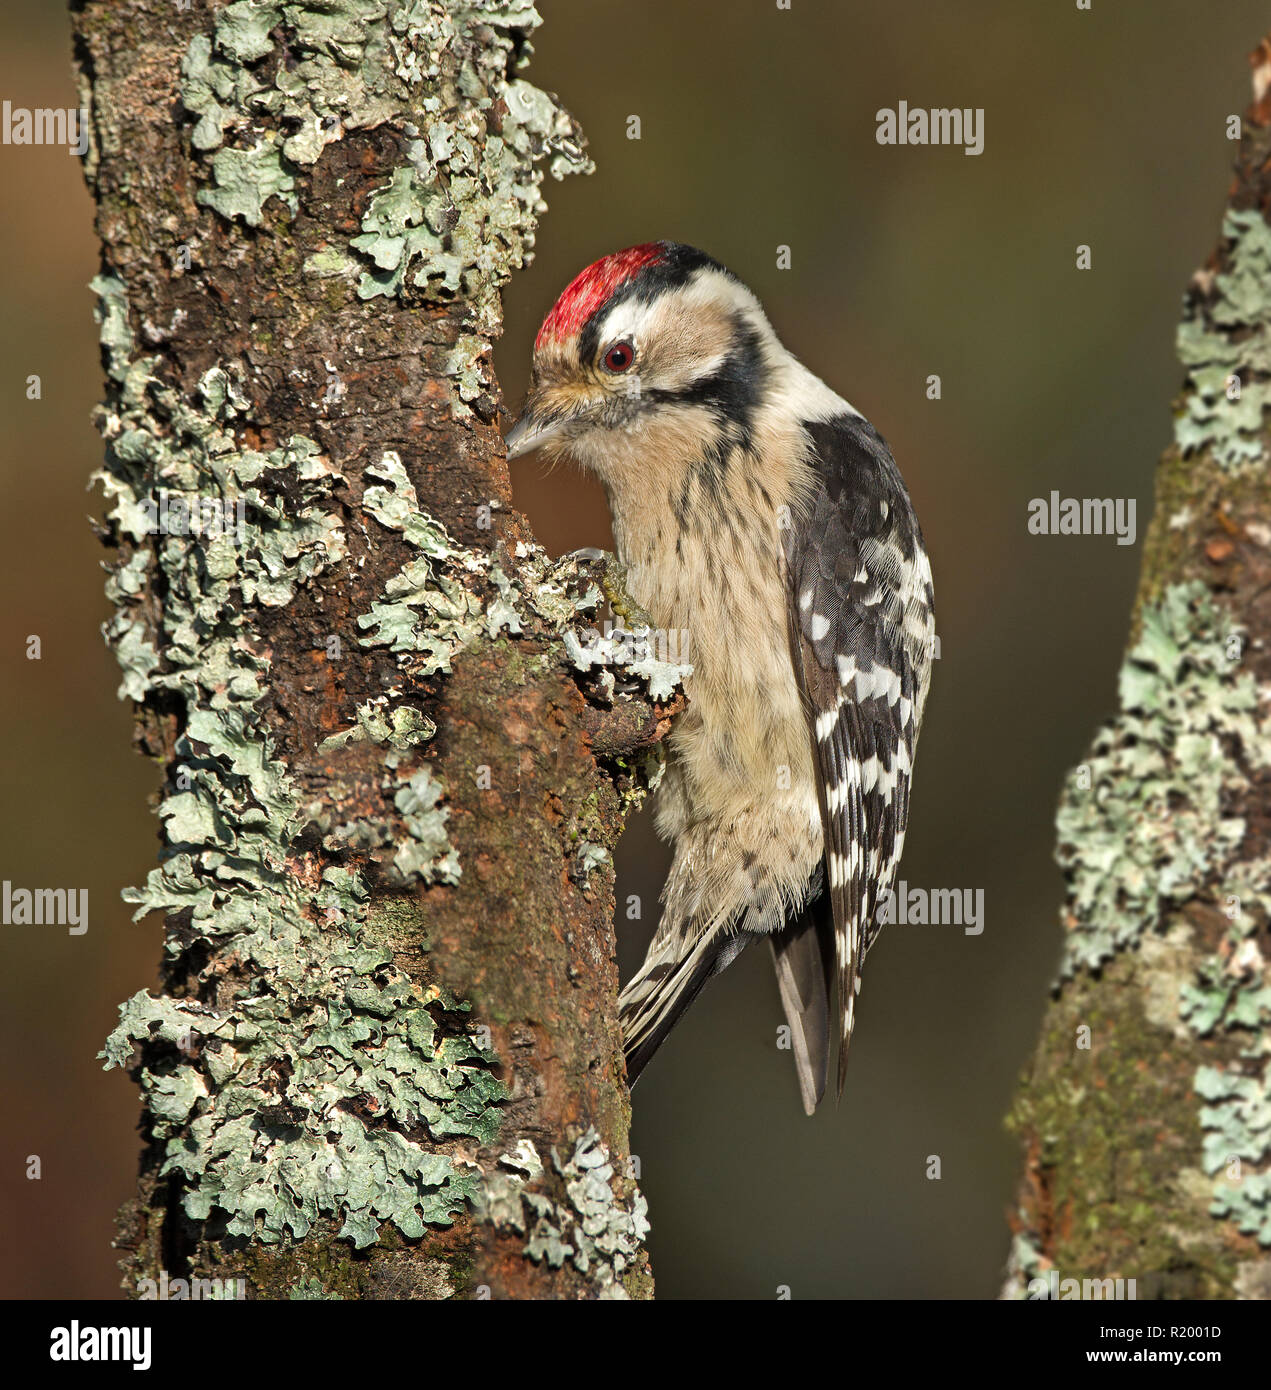 Lesser Spotted Woodpecker (Dryobates minor, Dendrocopos minor). Adult male on lichen-covered branch. Germany Stock Photo